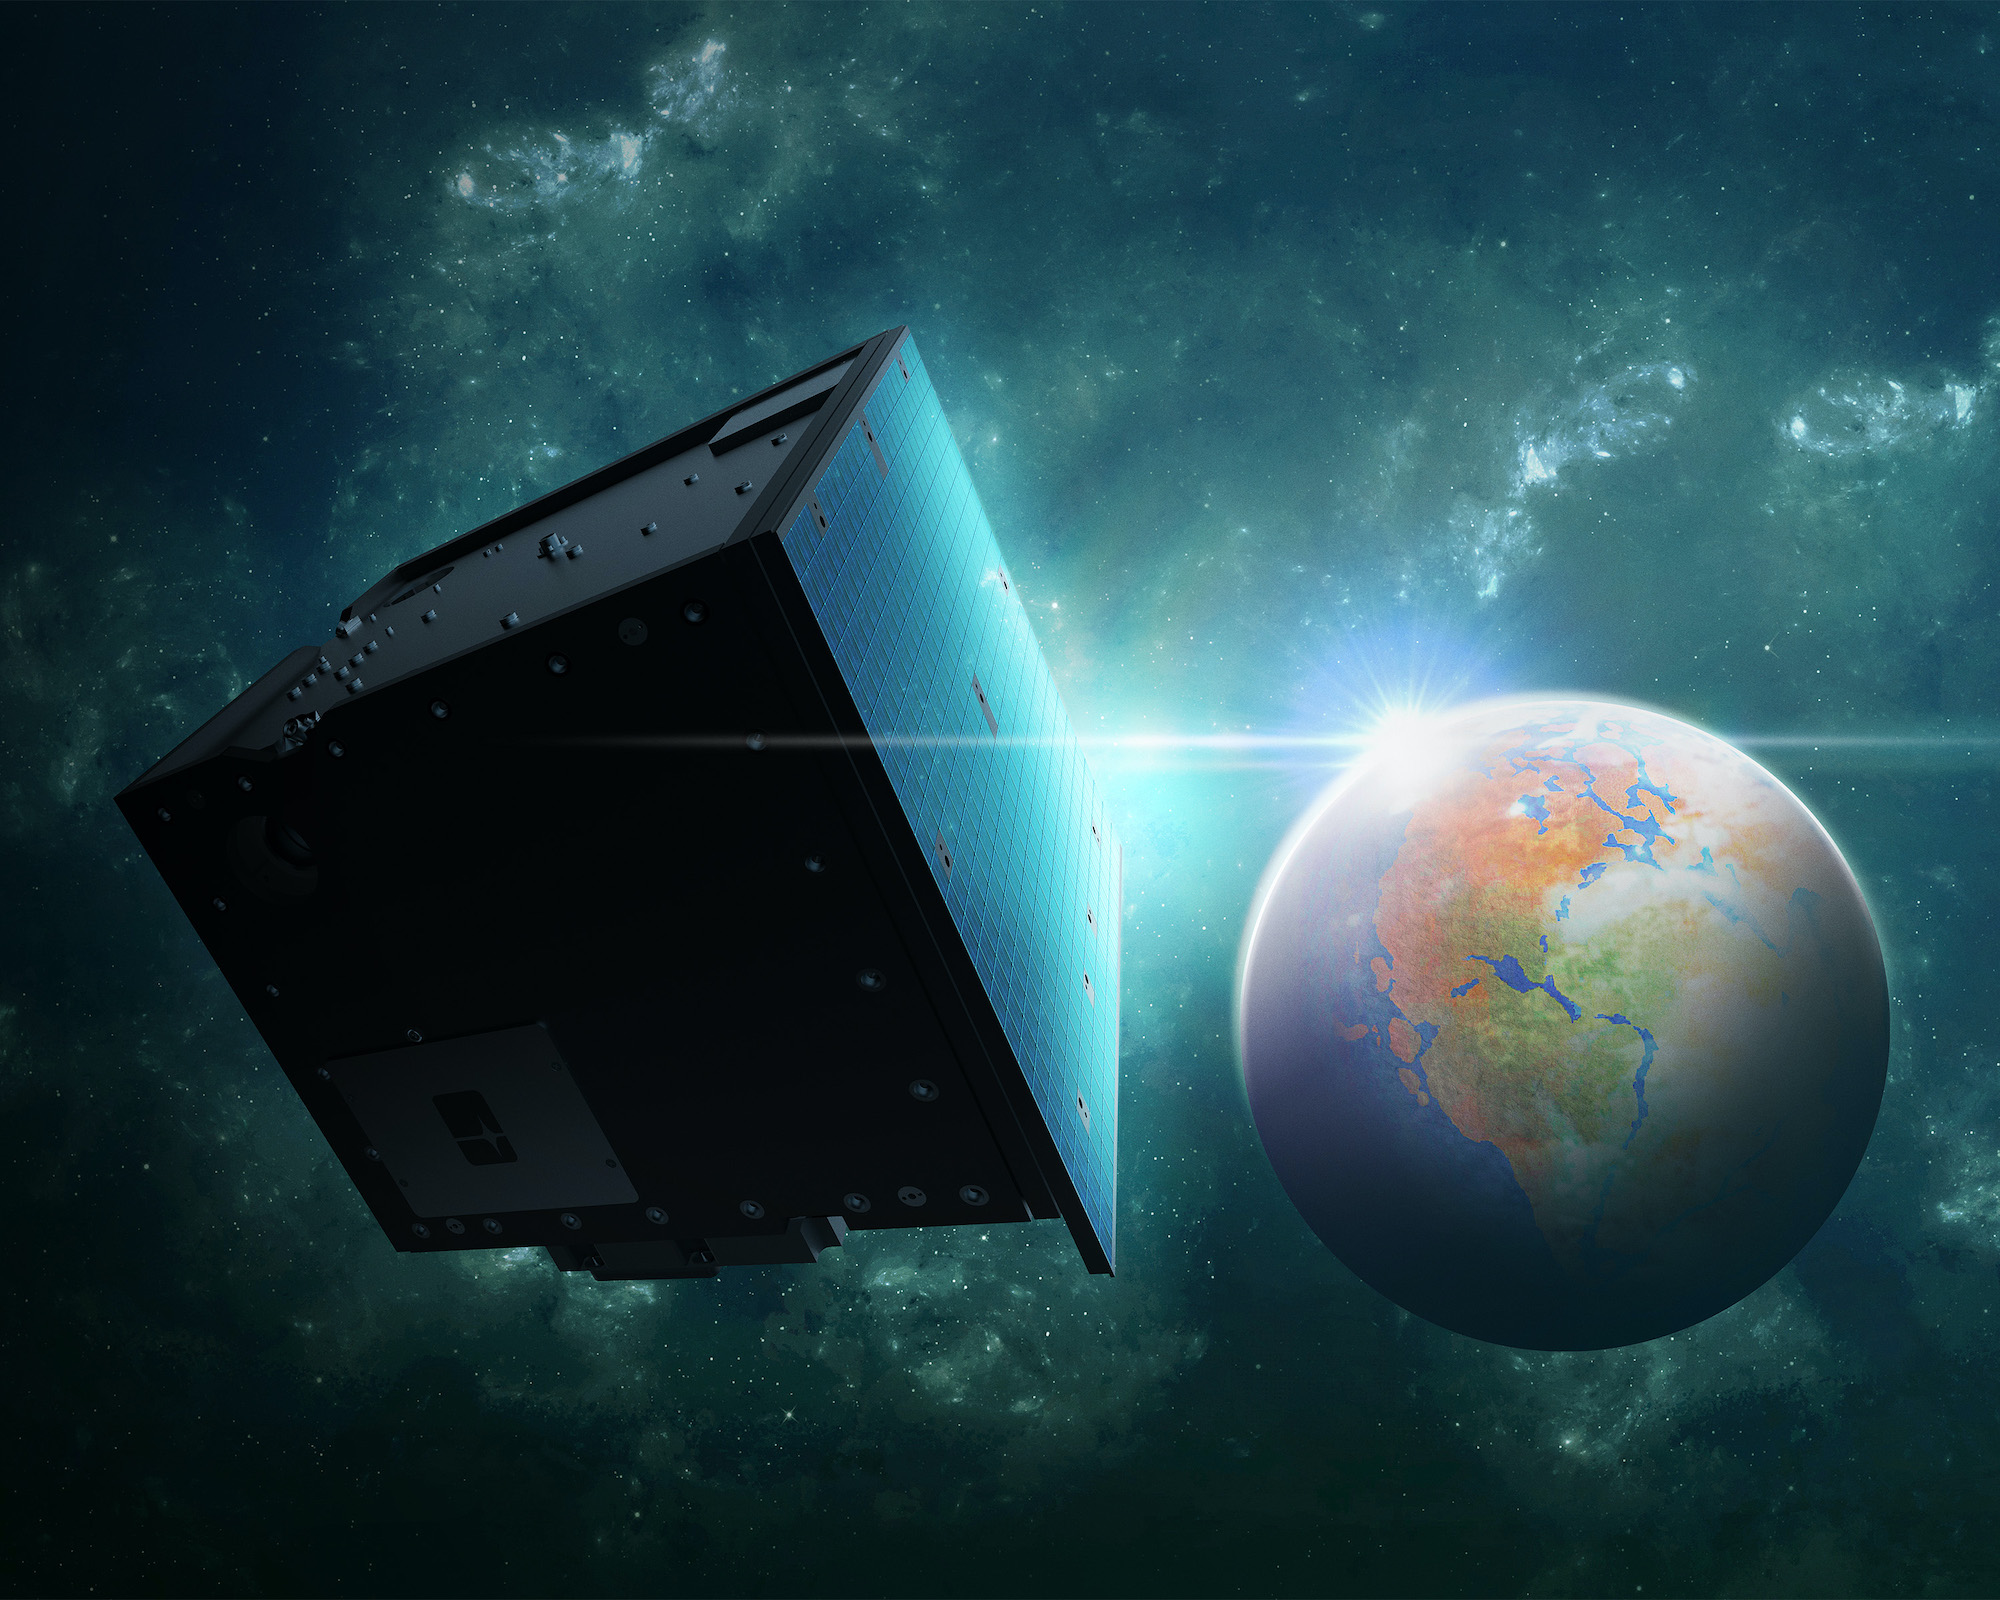 Millennium Space delivers cubesat for upcoming U.S. Space Force rideshare mission